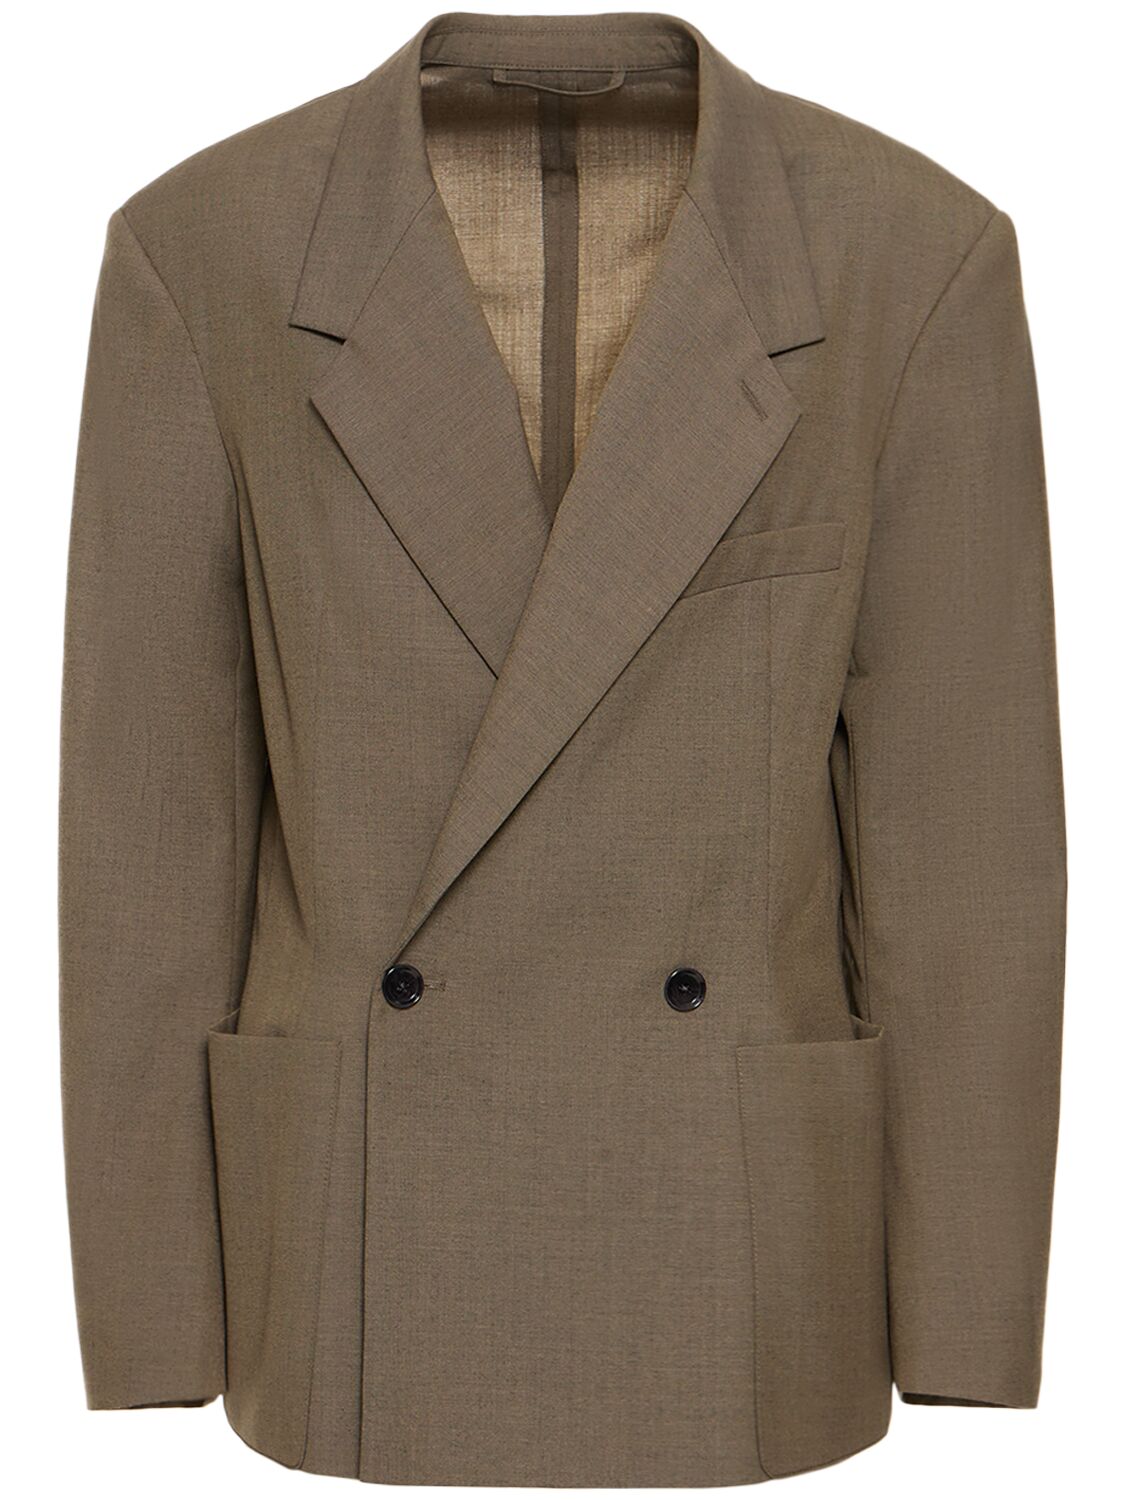 Soft Tailored Wool Blend Jacket